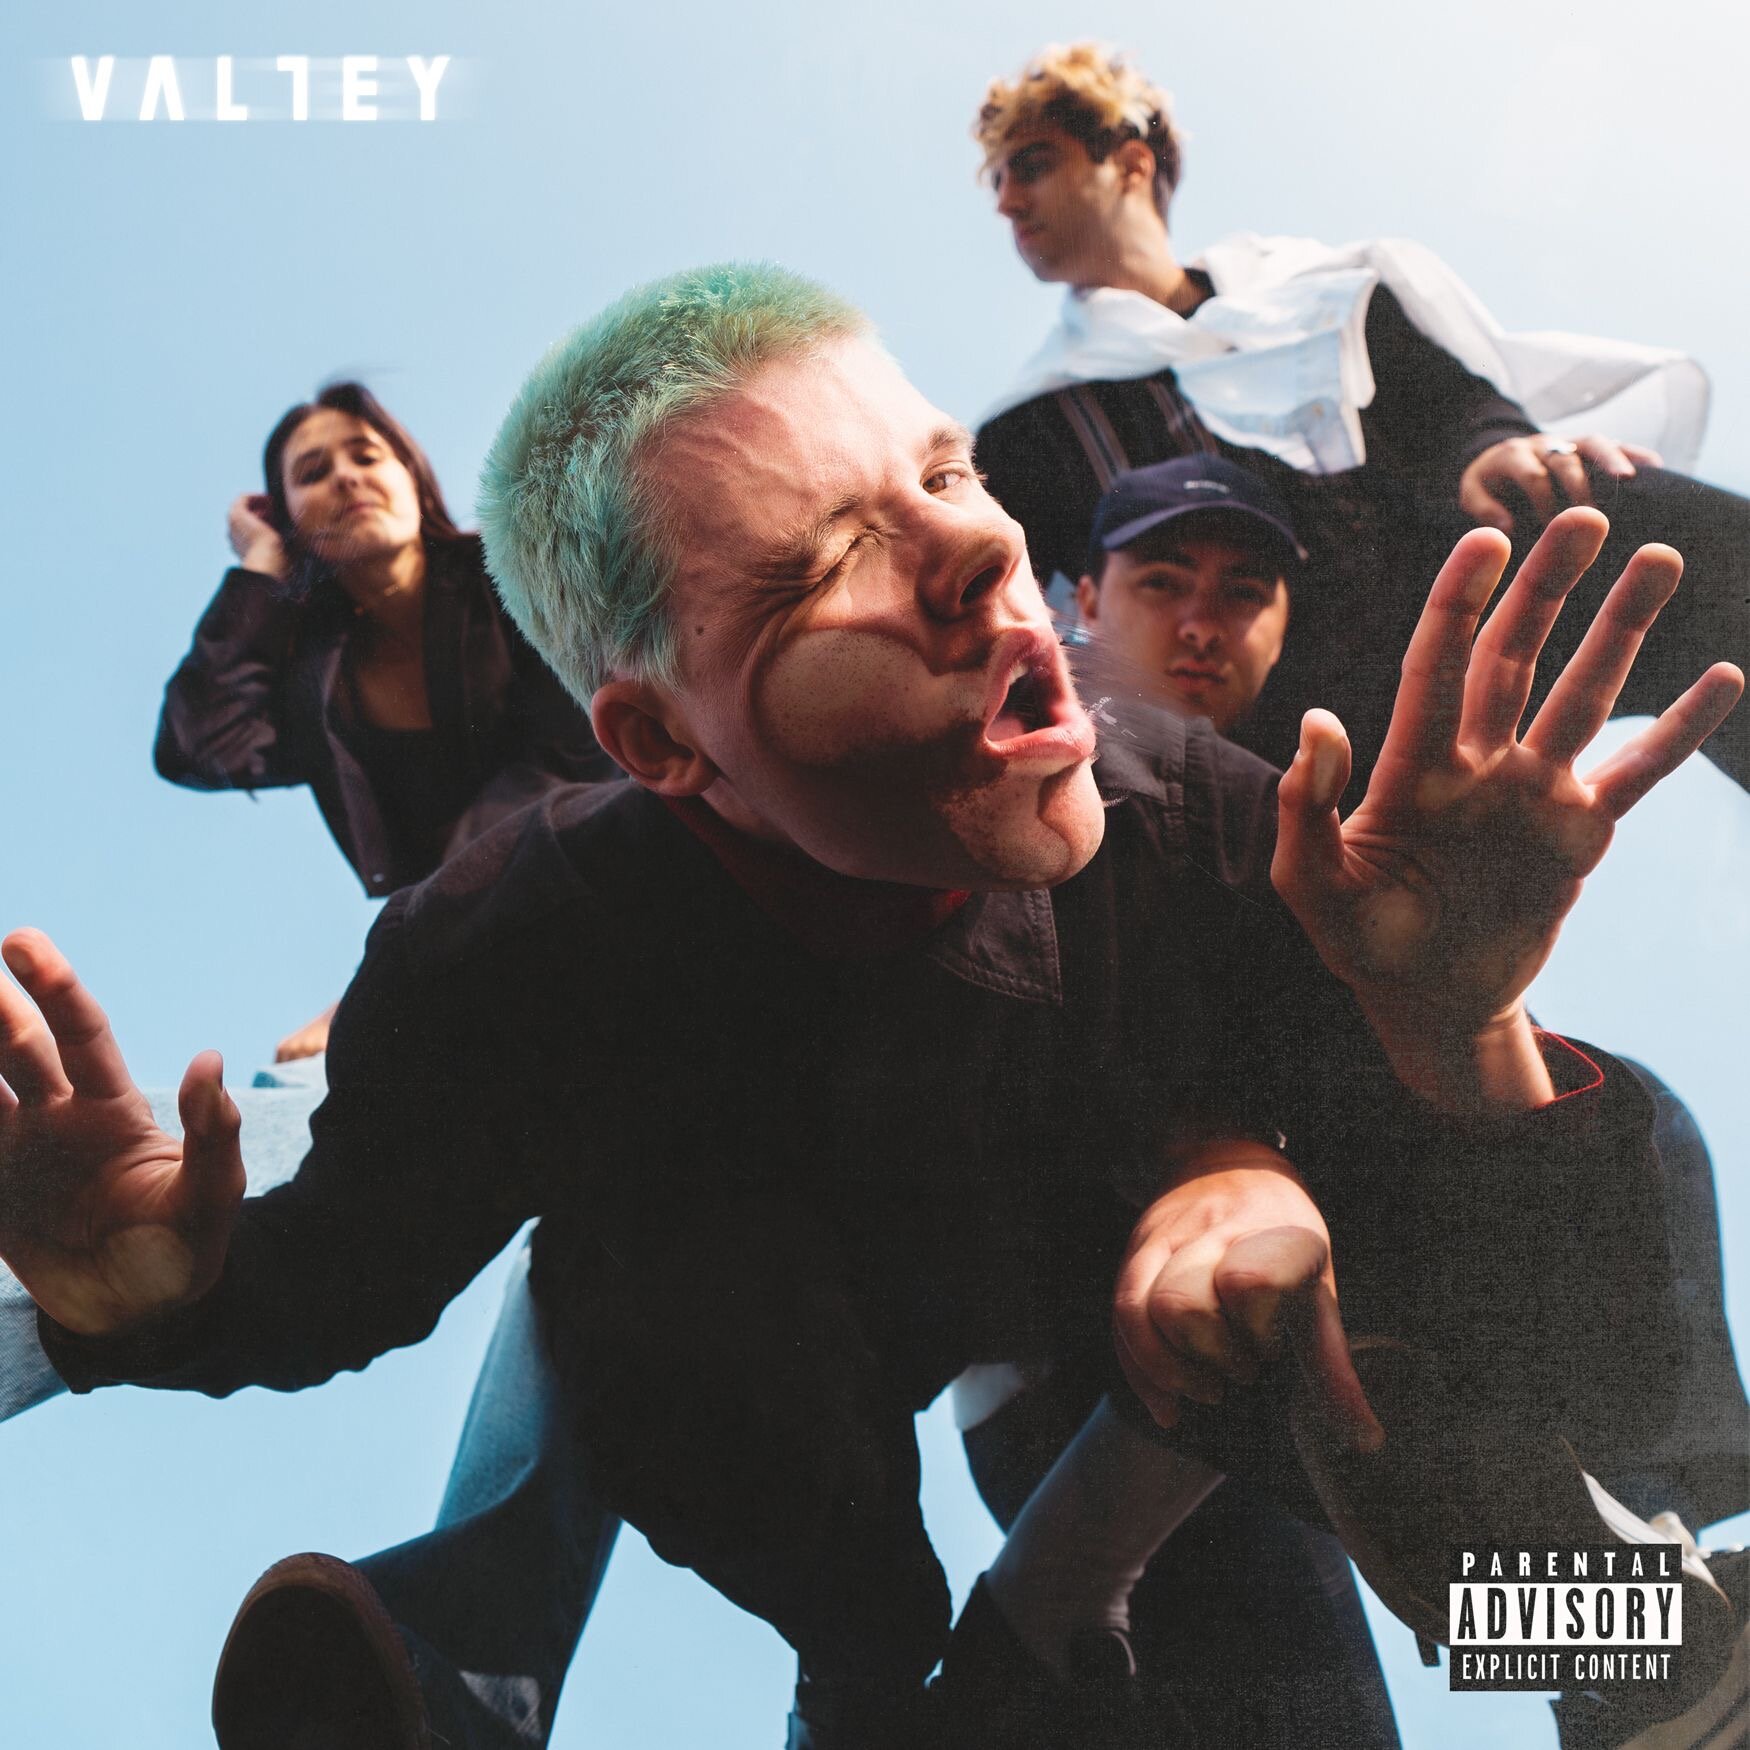 Valley "Sucks to see you doing better" EP 